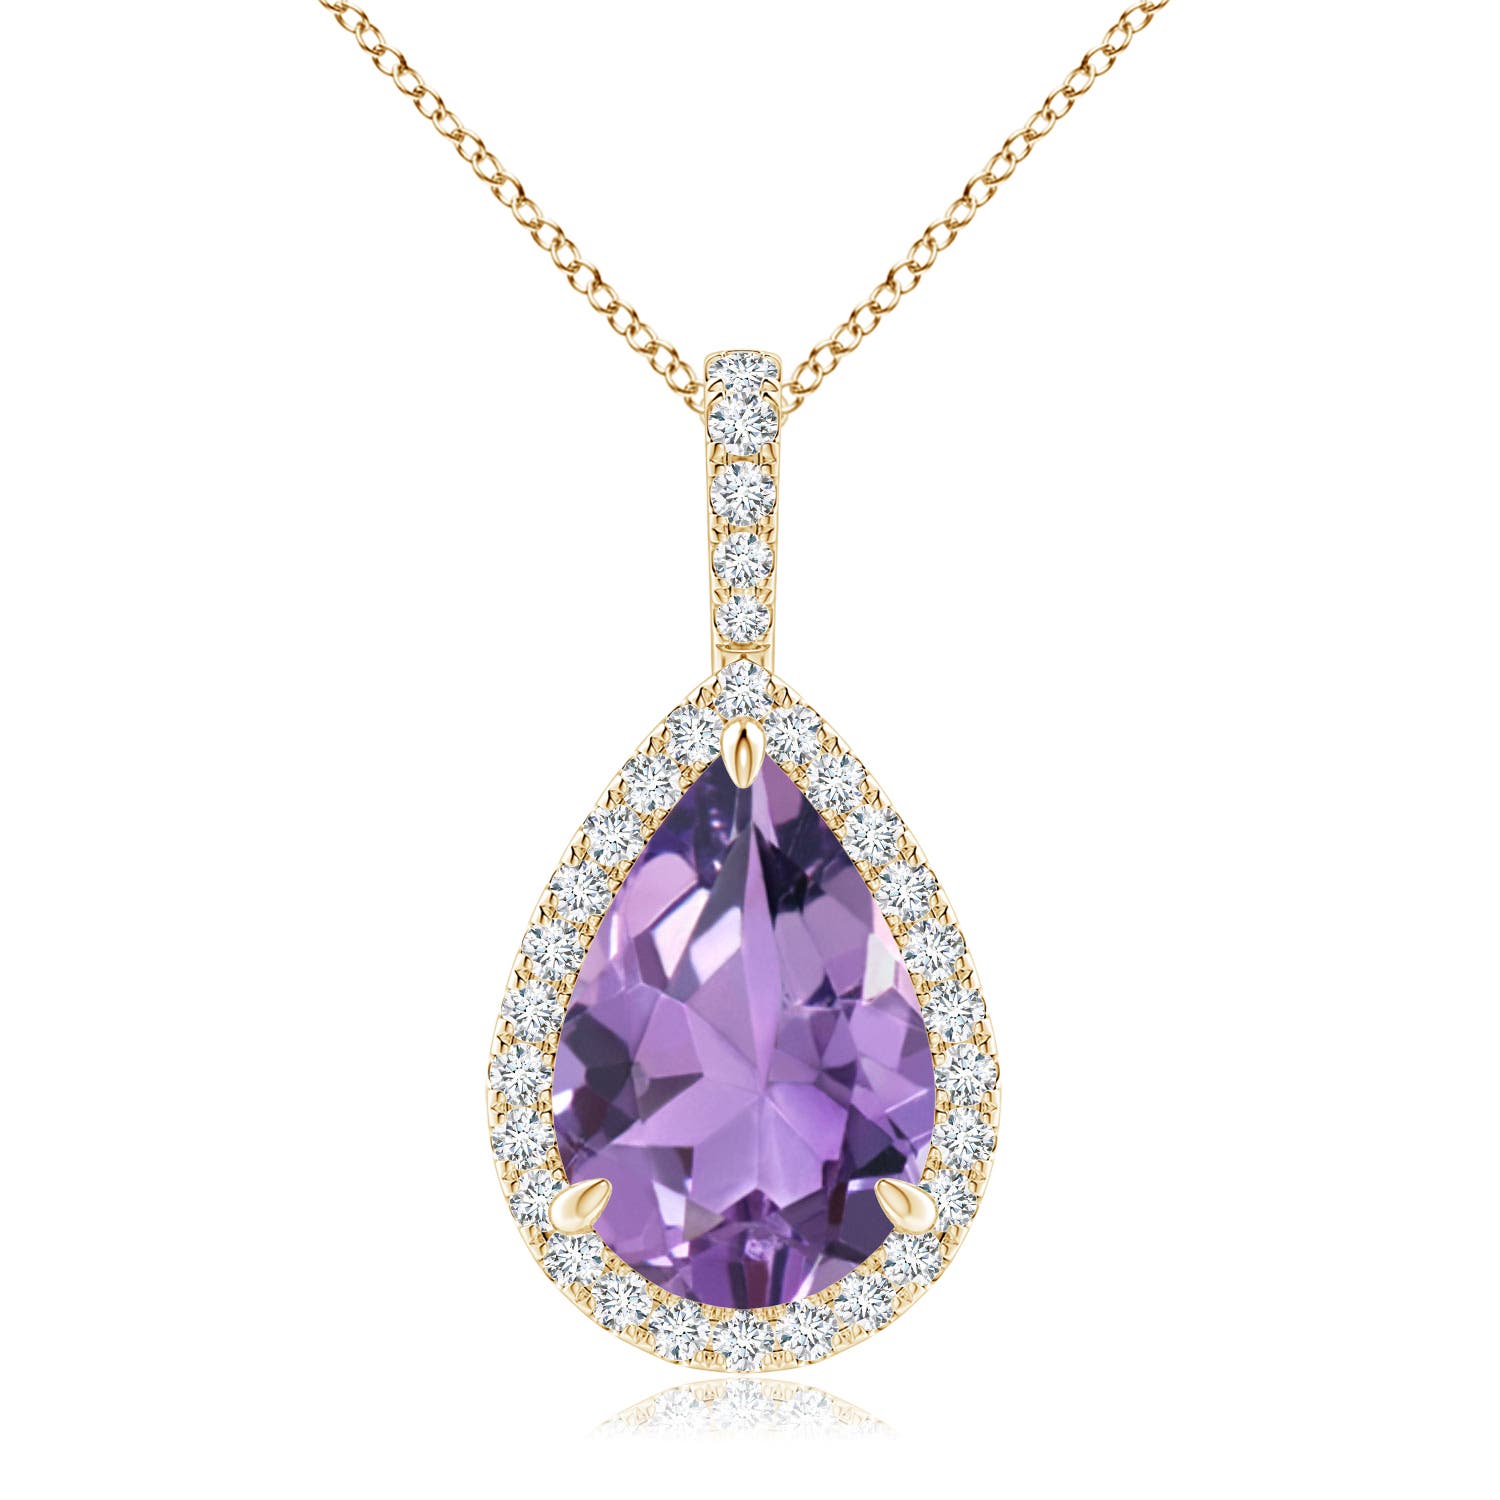 A - Amethyst / 2.85 CT / 14 KT Yellow Gold